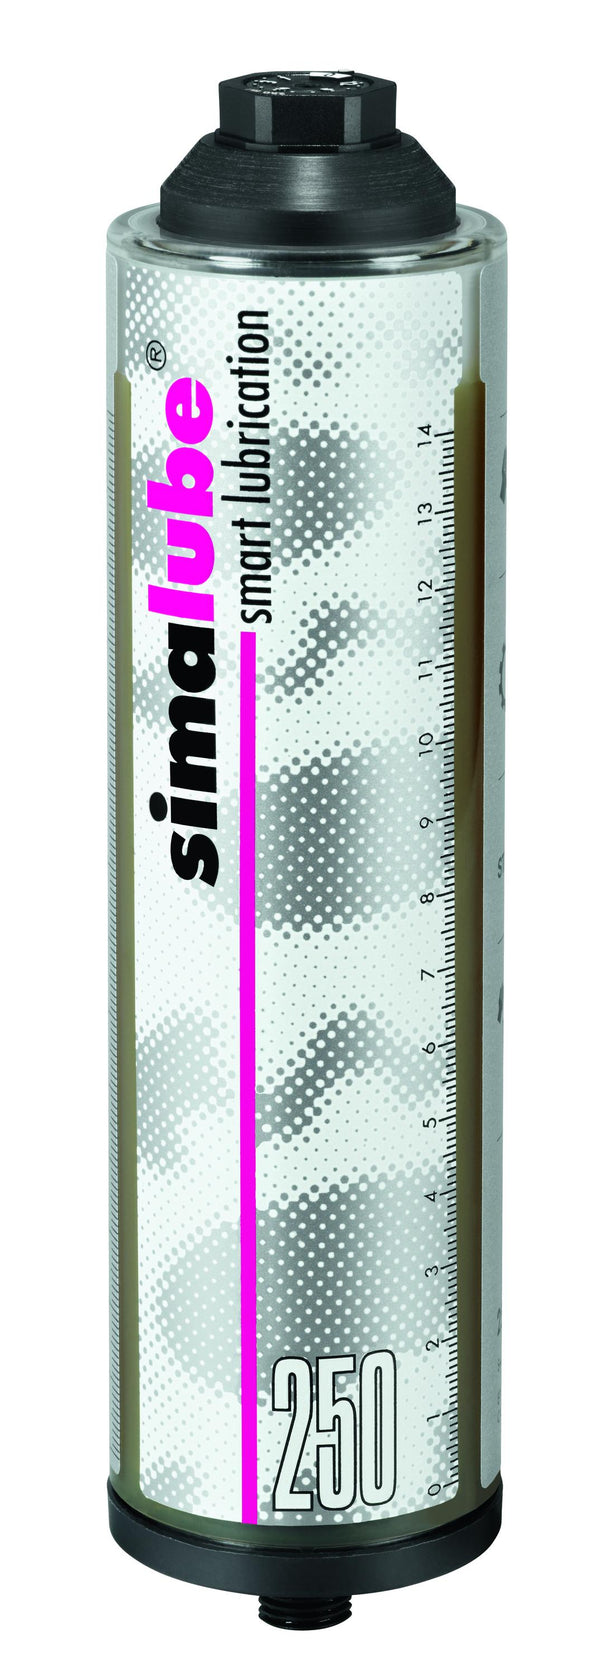 Simalube lubricator filled with high temperature grease 125ml